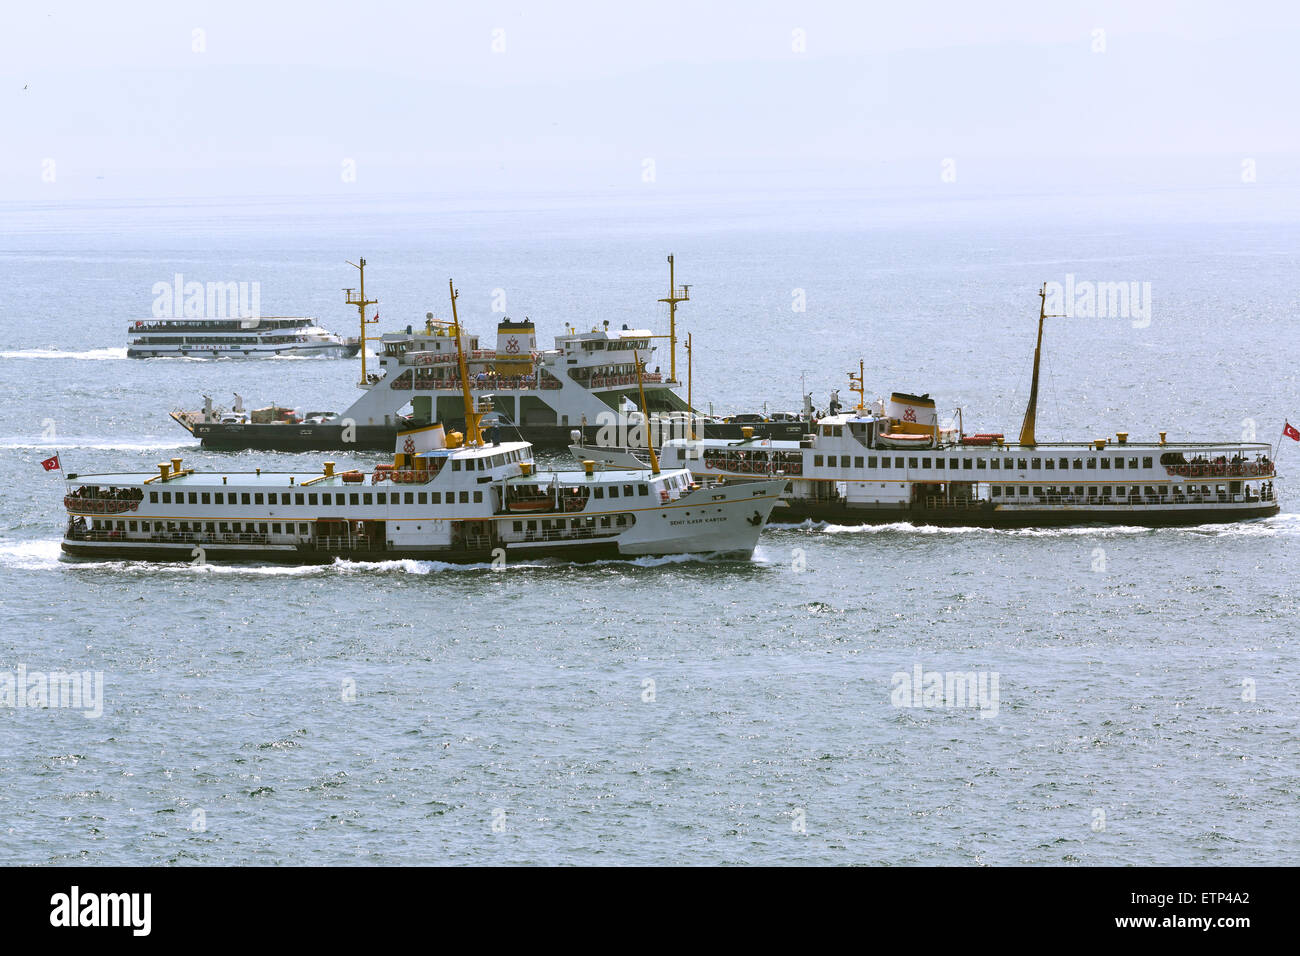 Ferries in the Crowded congested waters of the port of Istanbul Turkey Stock Photo